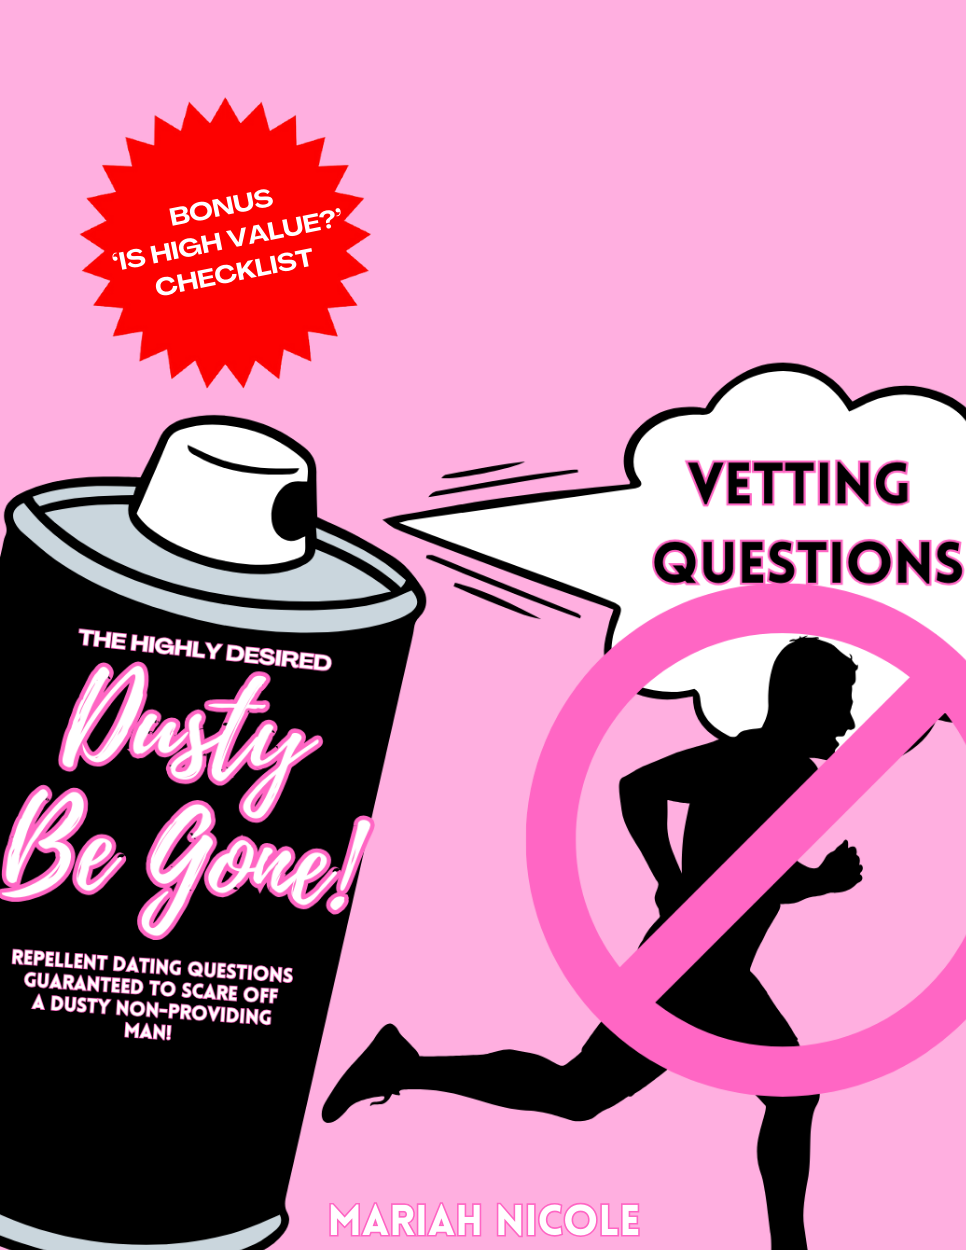 "DUSTY BE GONE!" VETTING QUESTIONS